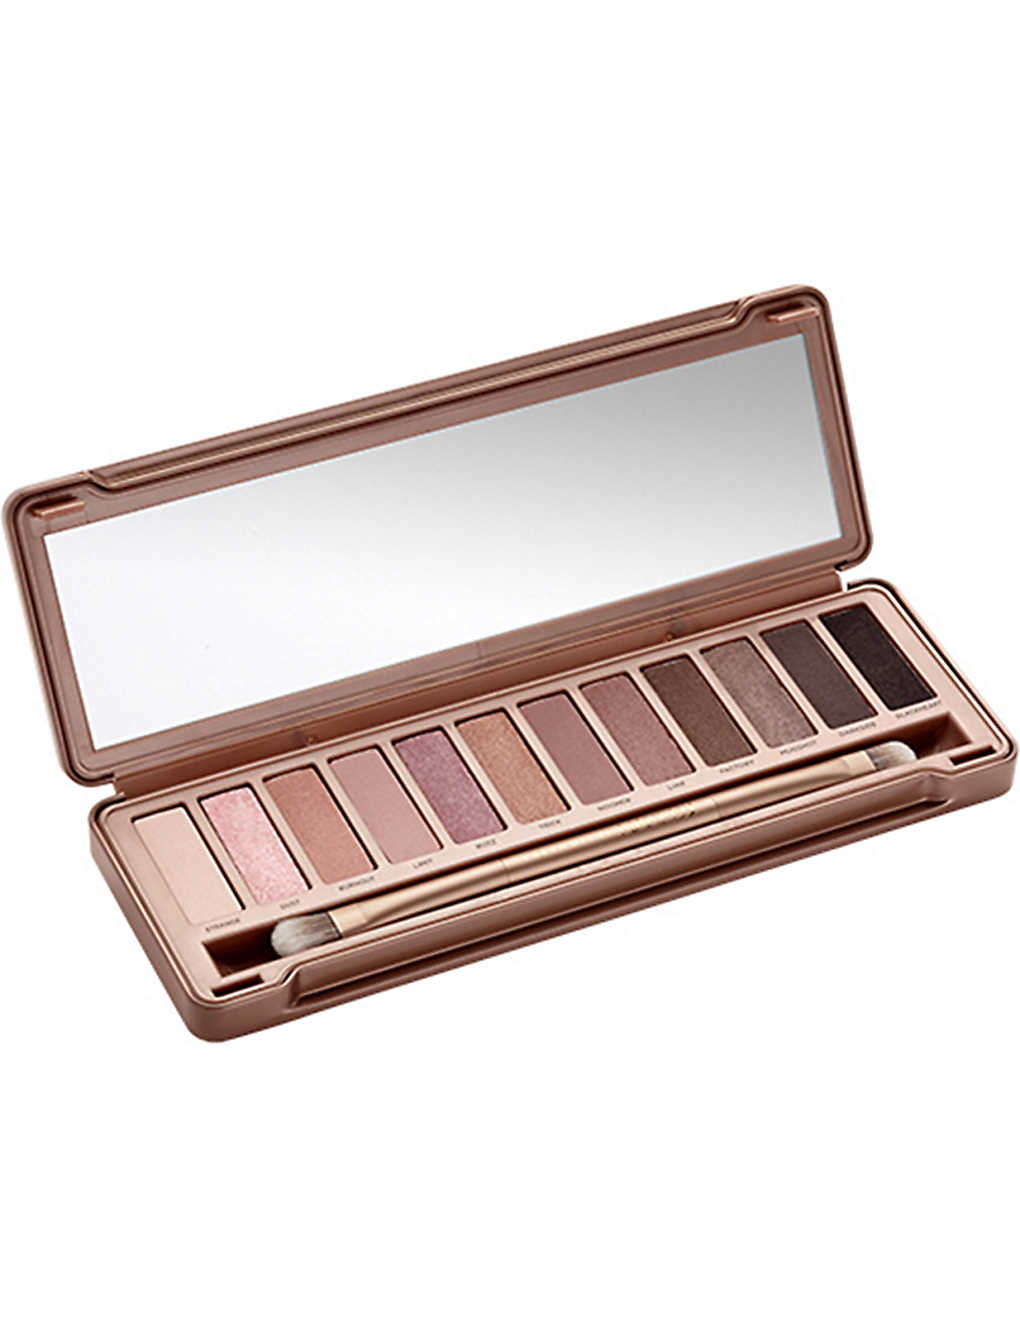 URBAN DECAY Naked 3 eyeshadow palette